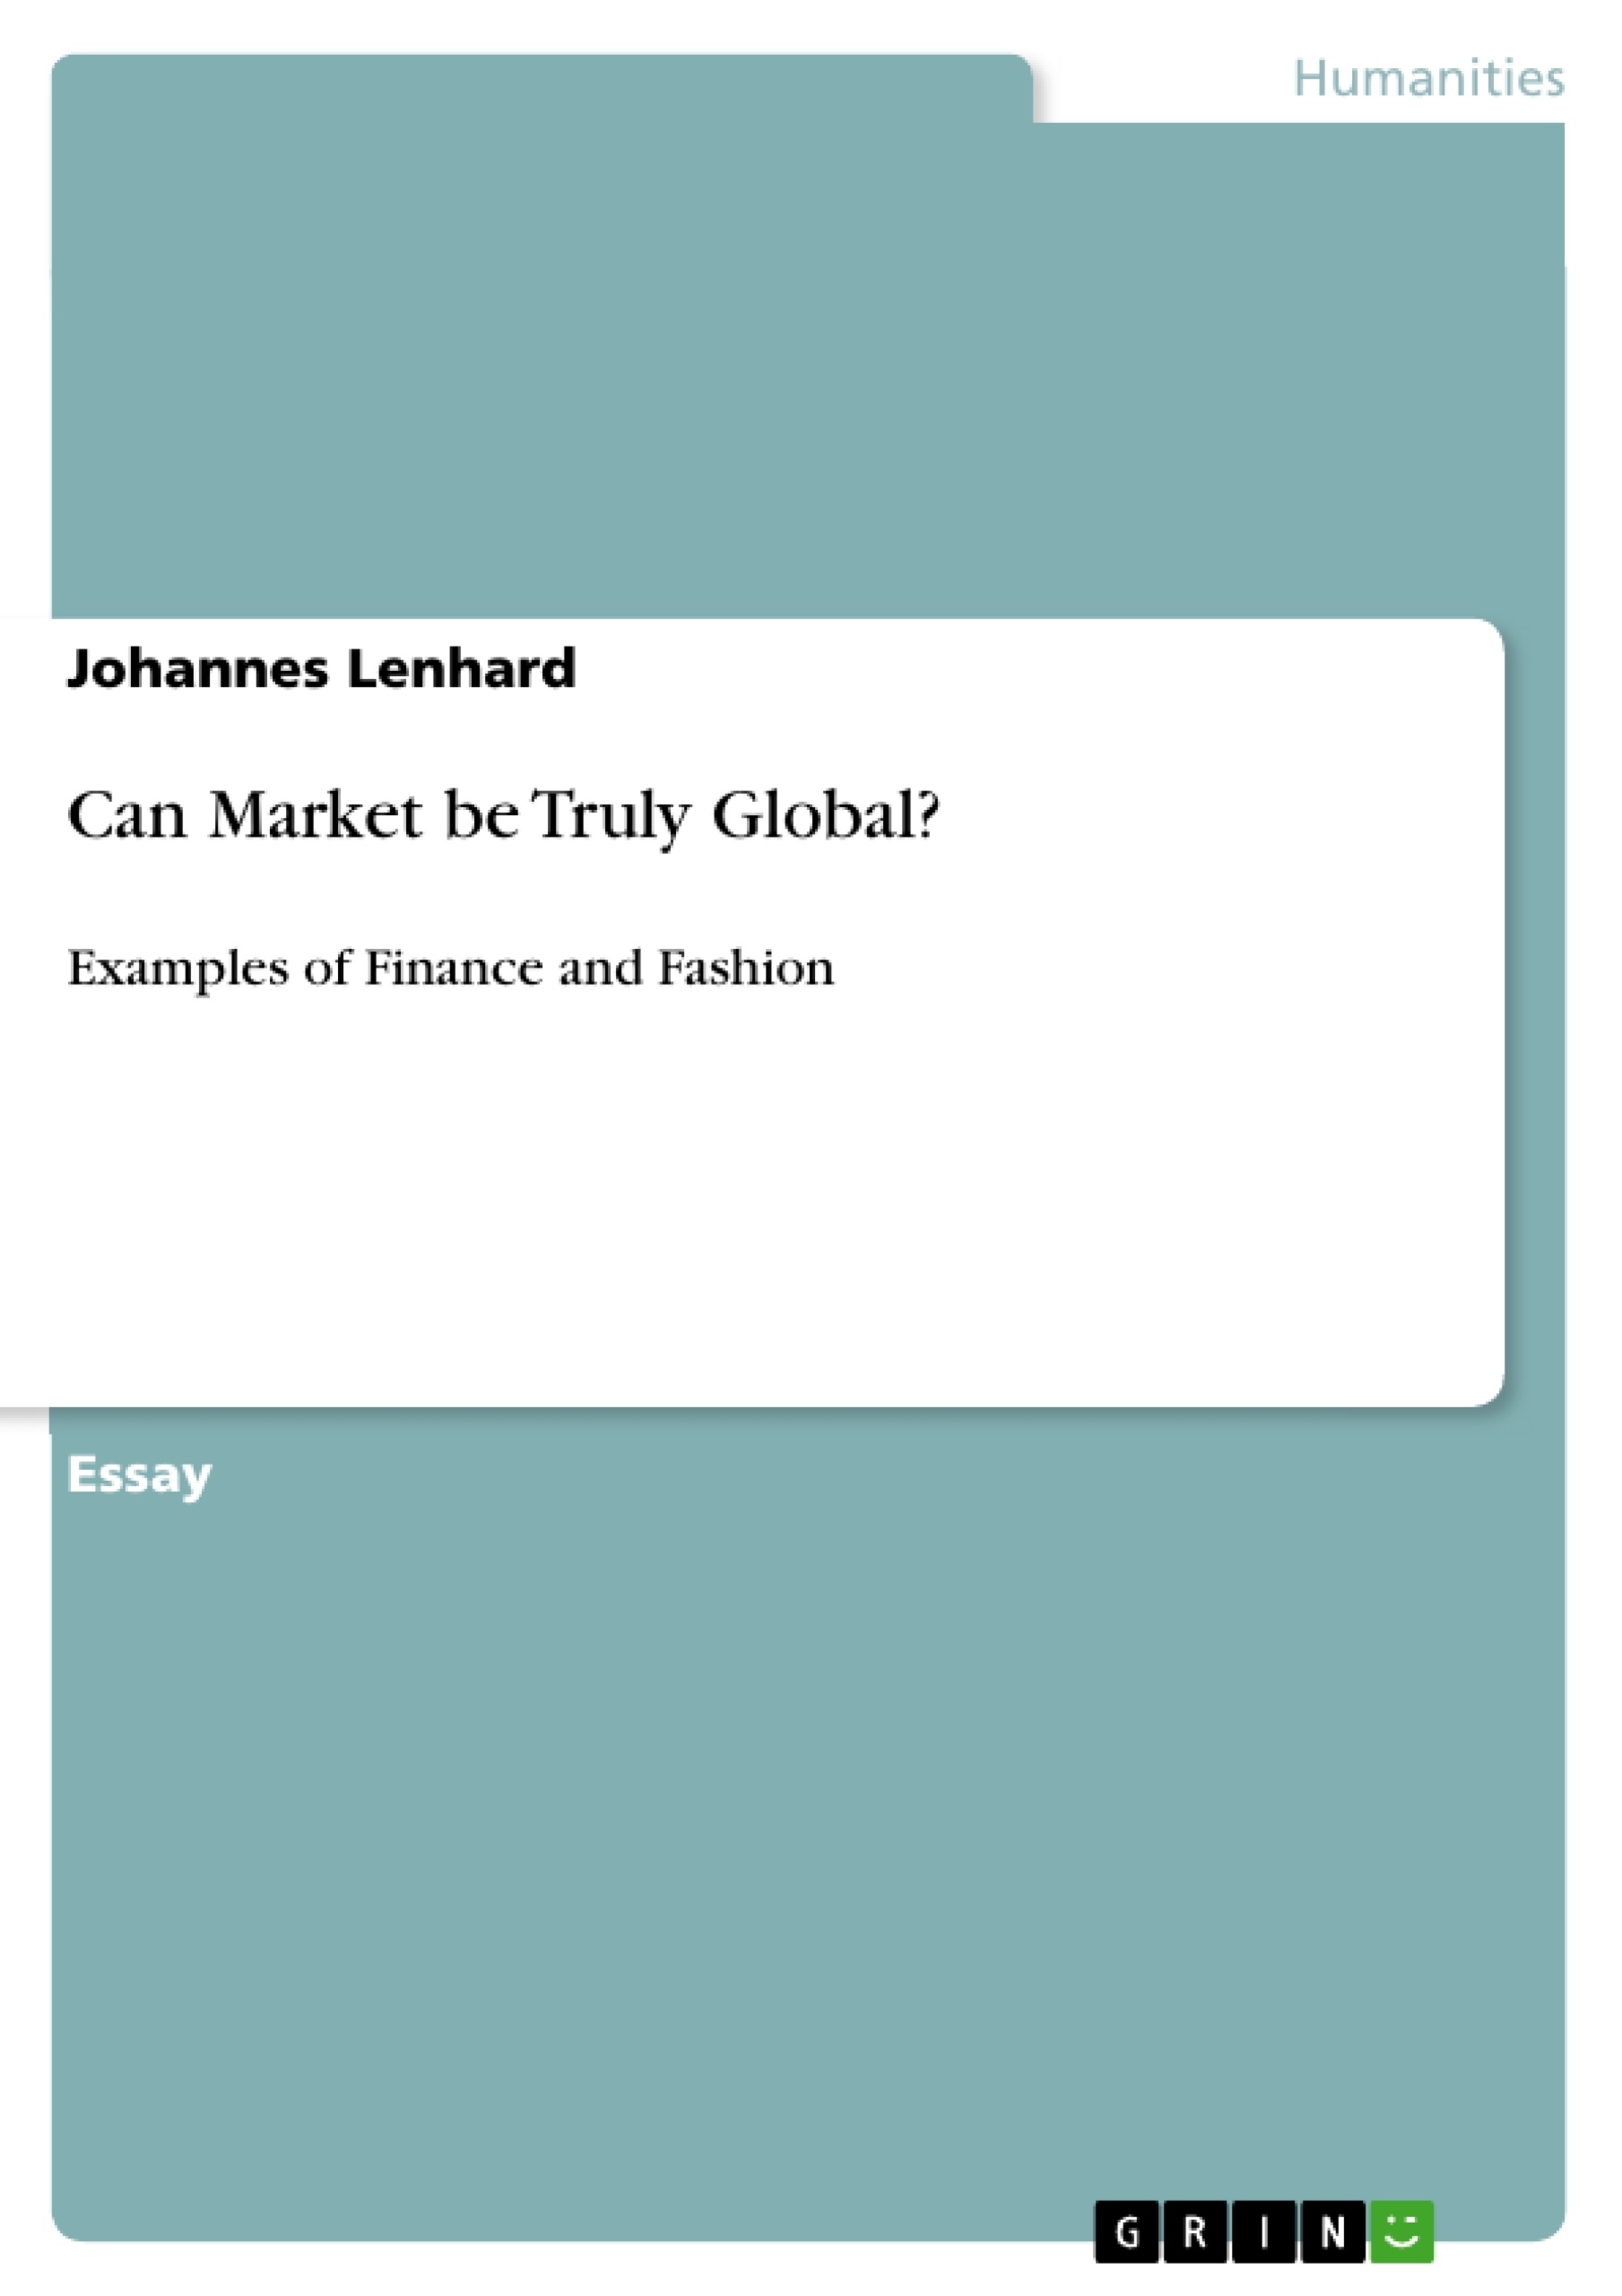 Title: Can Market be Truly Global?